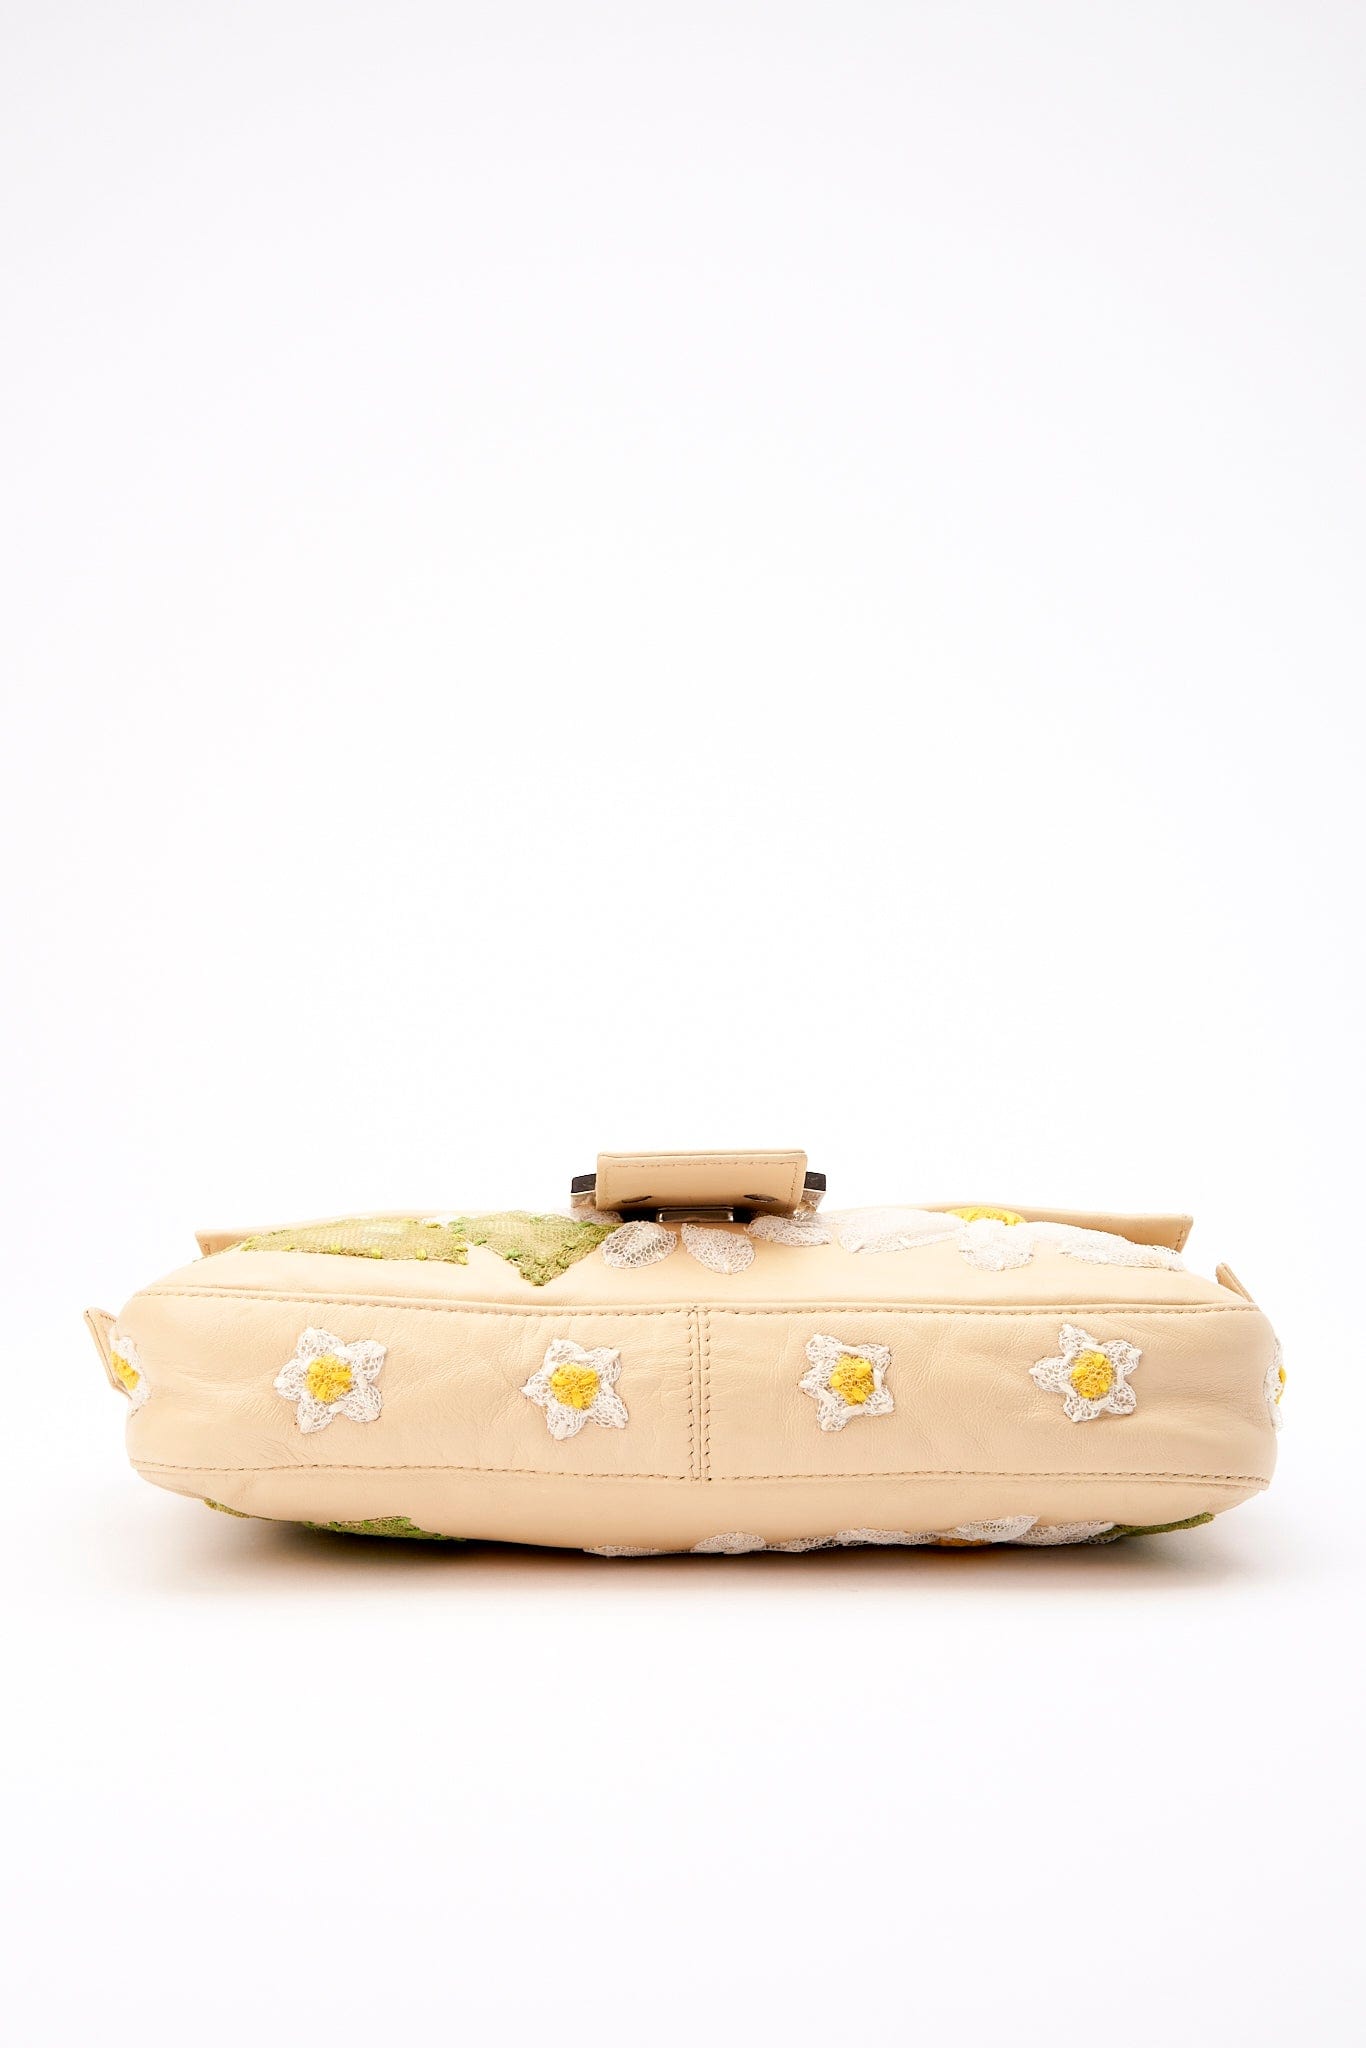 Vintage Fendi Beige Leather Baguette with Embroidered Flowers